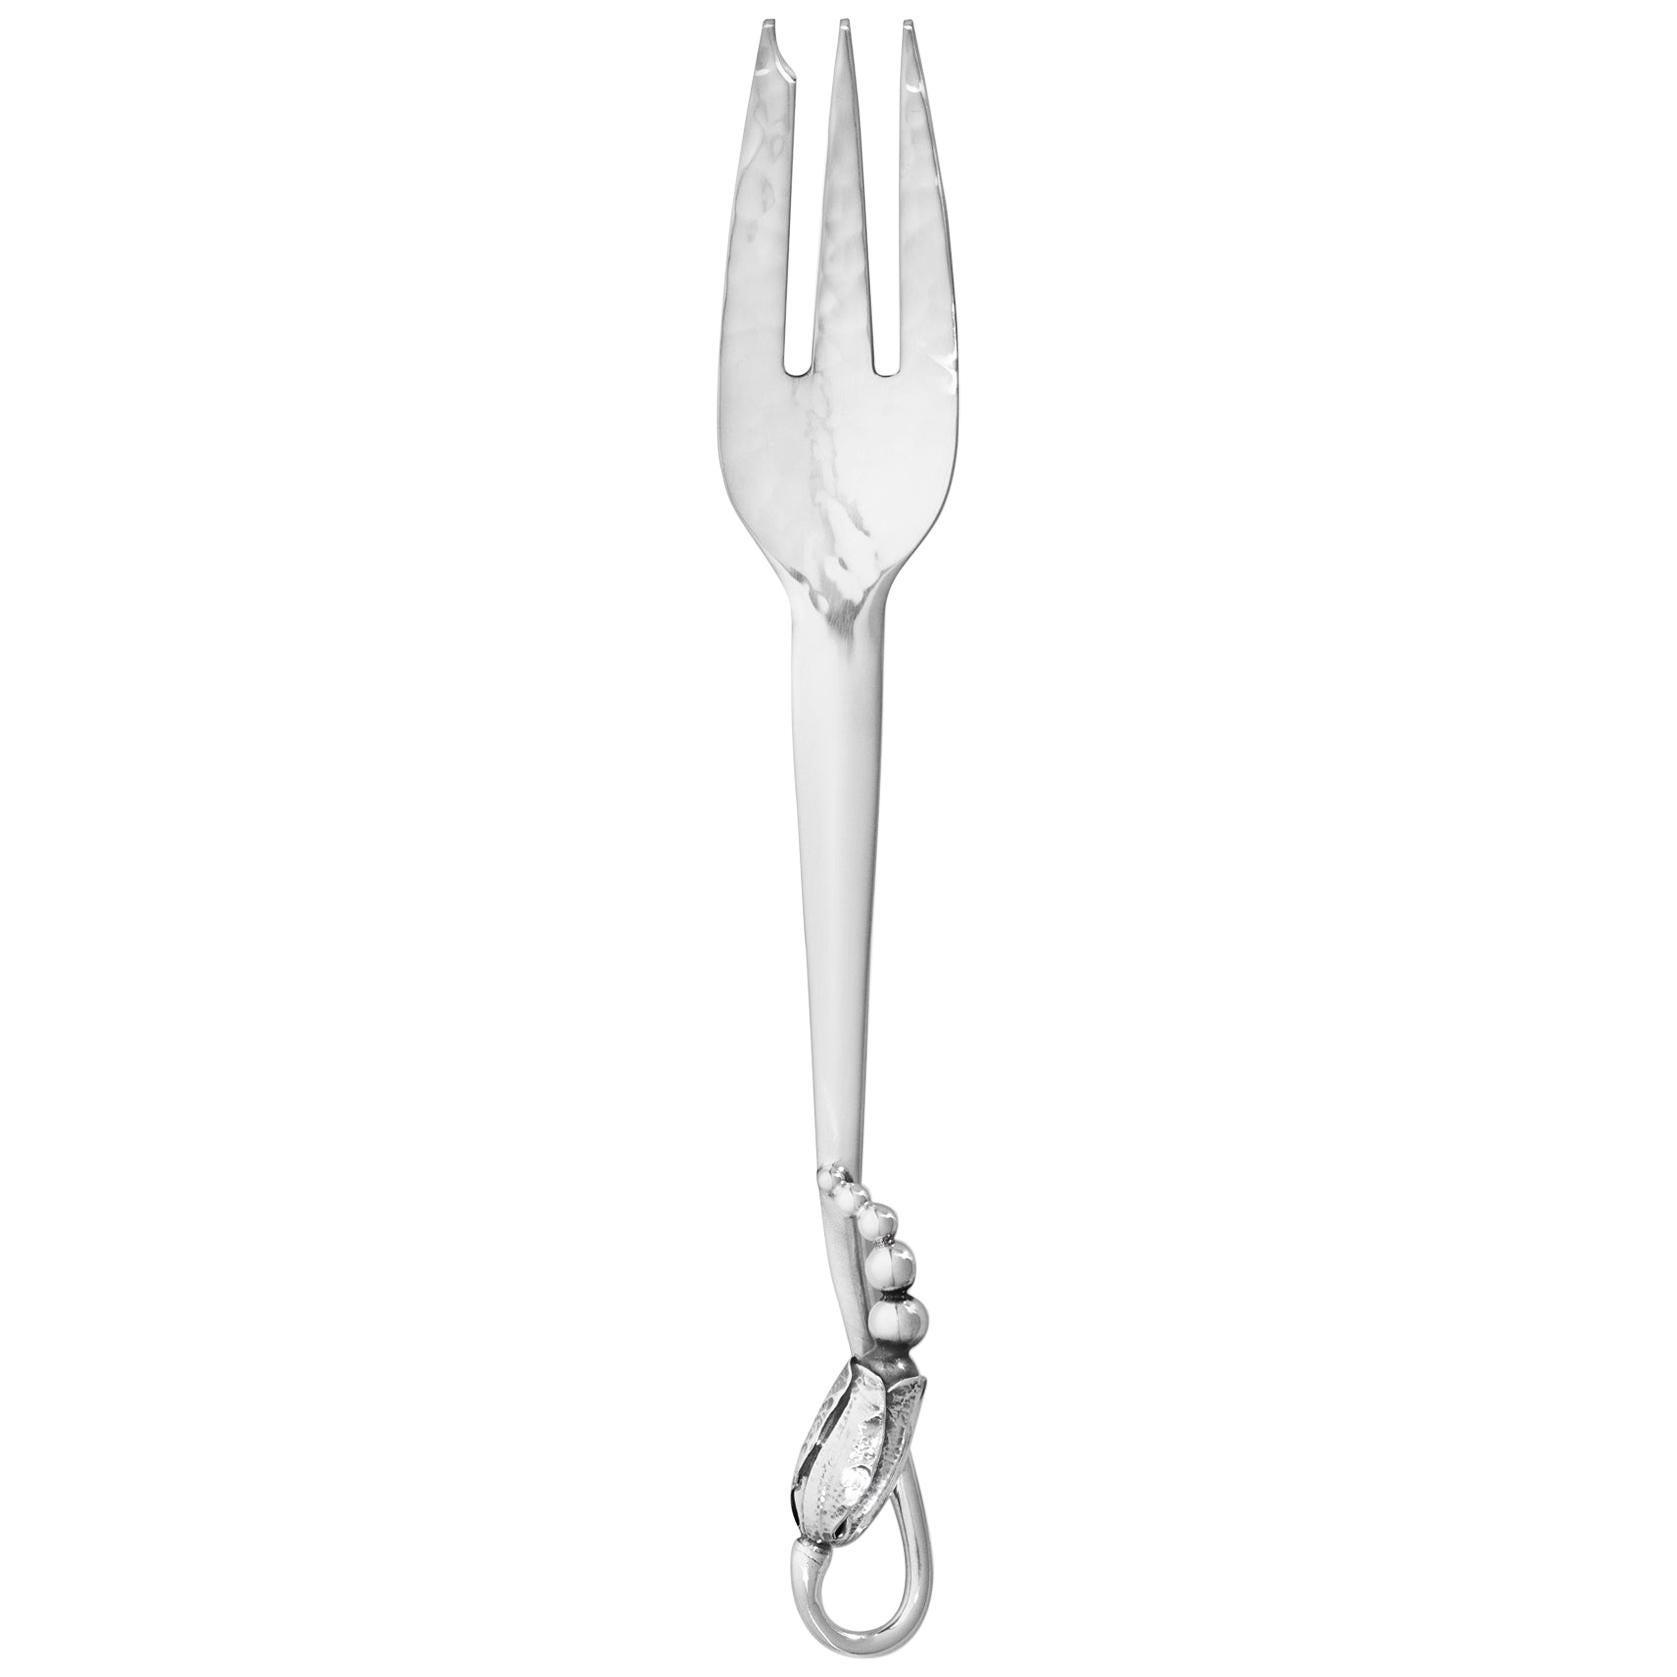 Georg Jensen Handcrafted Sterling Silver Blossom Pastry Fork